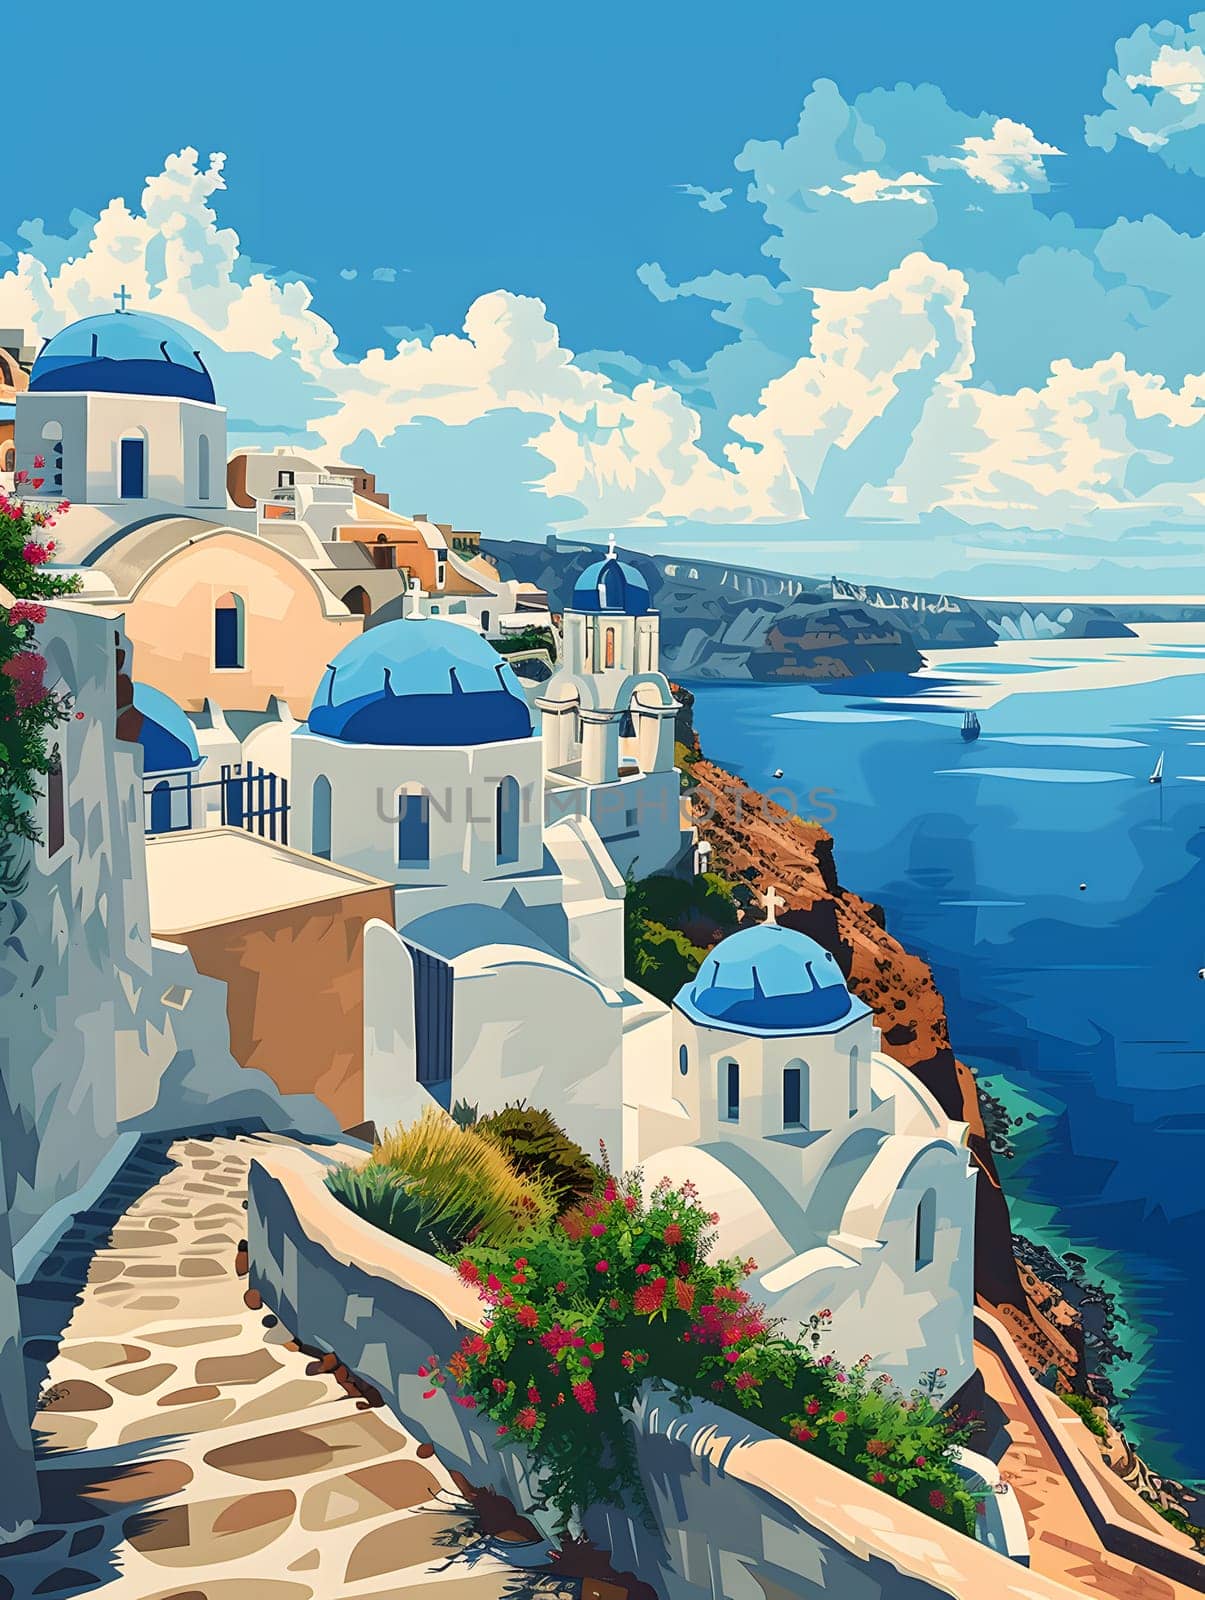 A painting depicting a city with picturesque bluedomed buildings perched by the ocean, under a cloudy sky. The urban design blends harmoniously with the natural landscape